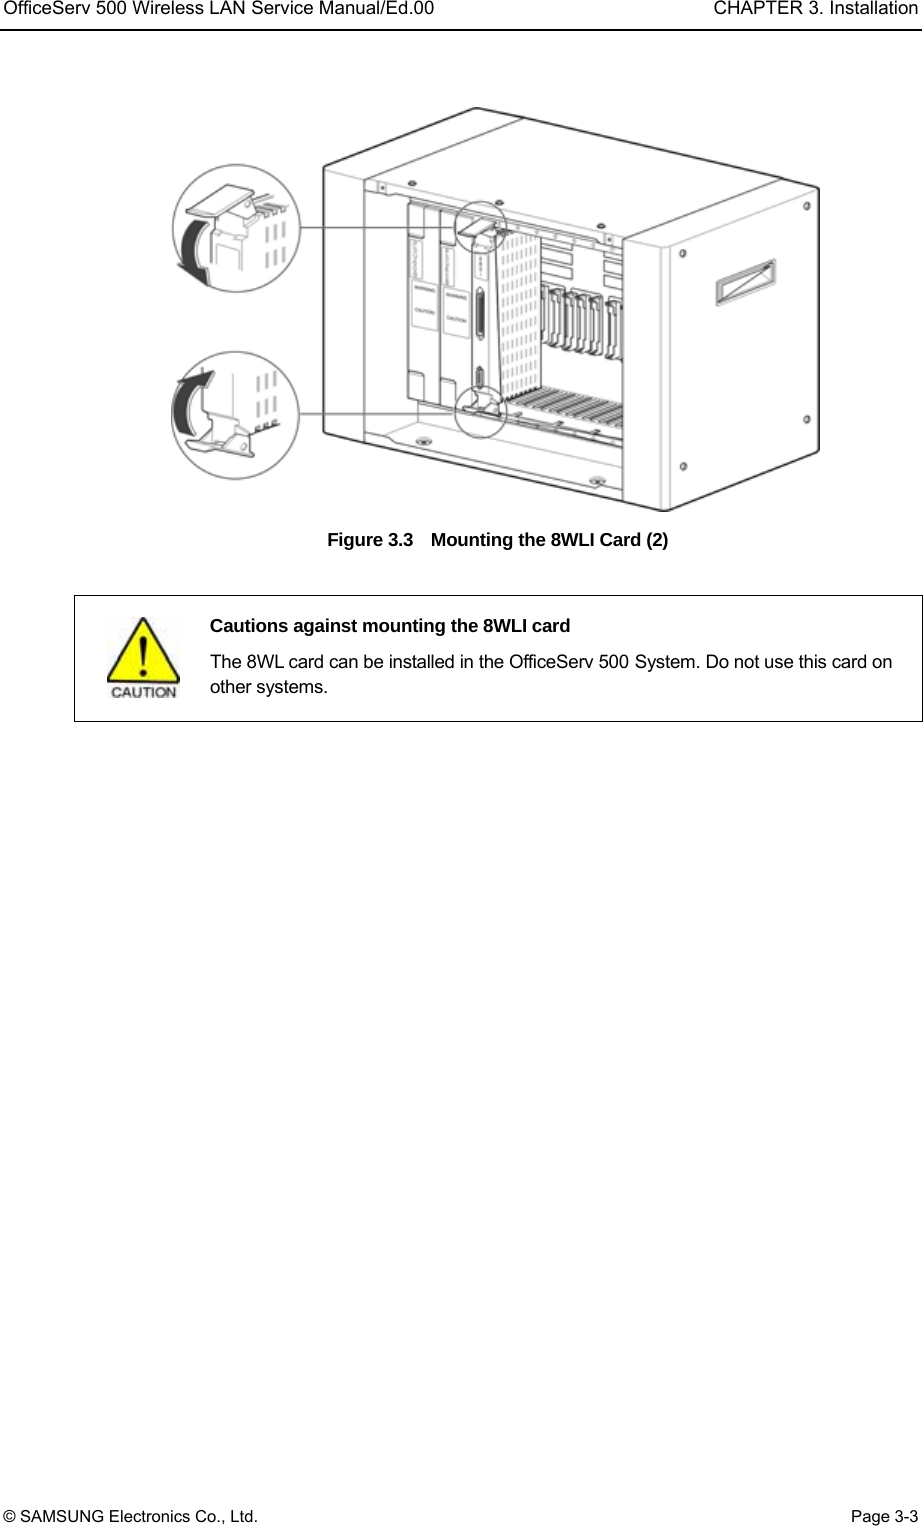 OfficeServ 500 Wireless LAN Service Manual/Ed.00  CHAPTER 3. Installation © SAMSUNG Electronics Co., Ltd.  Page 3-3  Figure 3.3    Mounting the 8WLI Card (2)     Cautions against mounting the 8WLI card   The 8WL card can be installed in the OfficeServ 500 System. Do not use this card on other systems.  